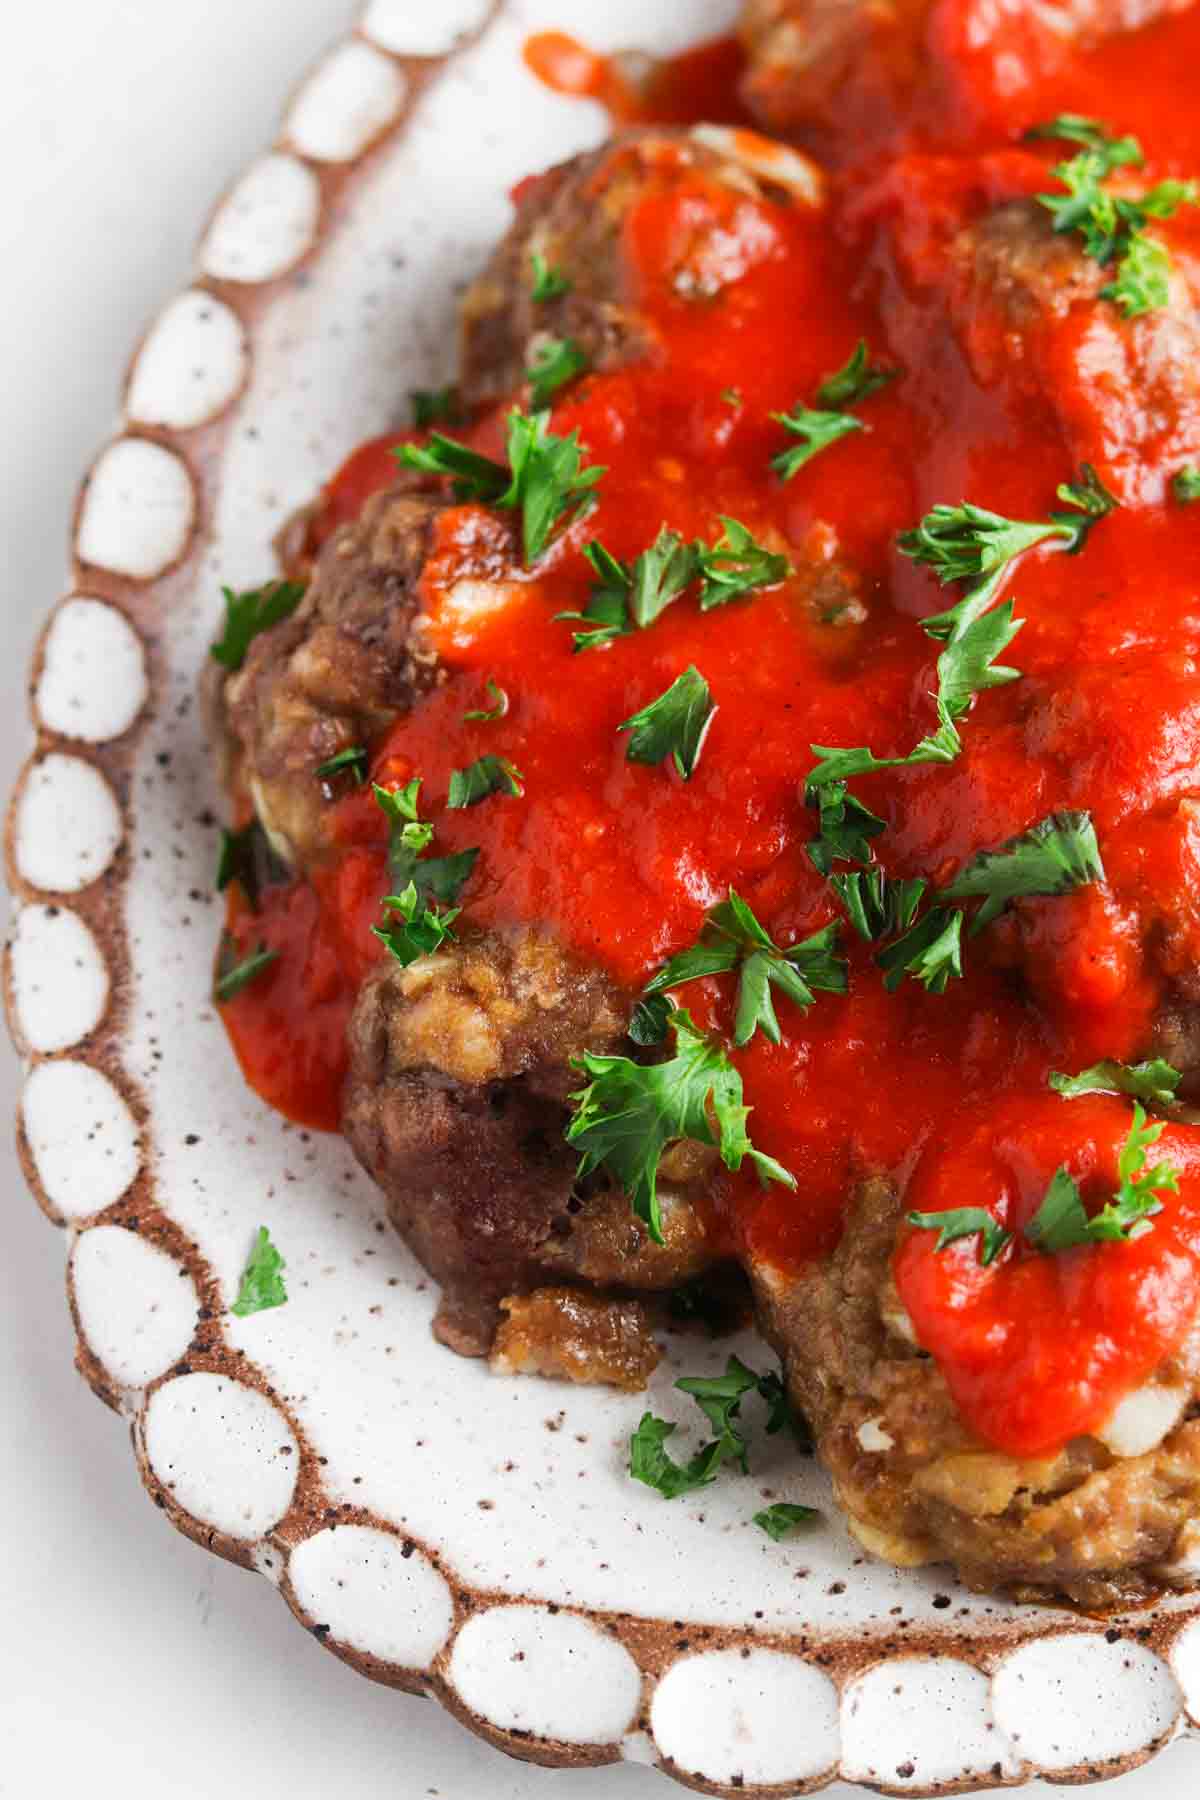 Gluten free meatballs on a white plate covered in red sauce and parsley.